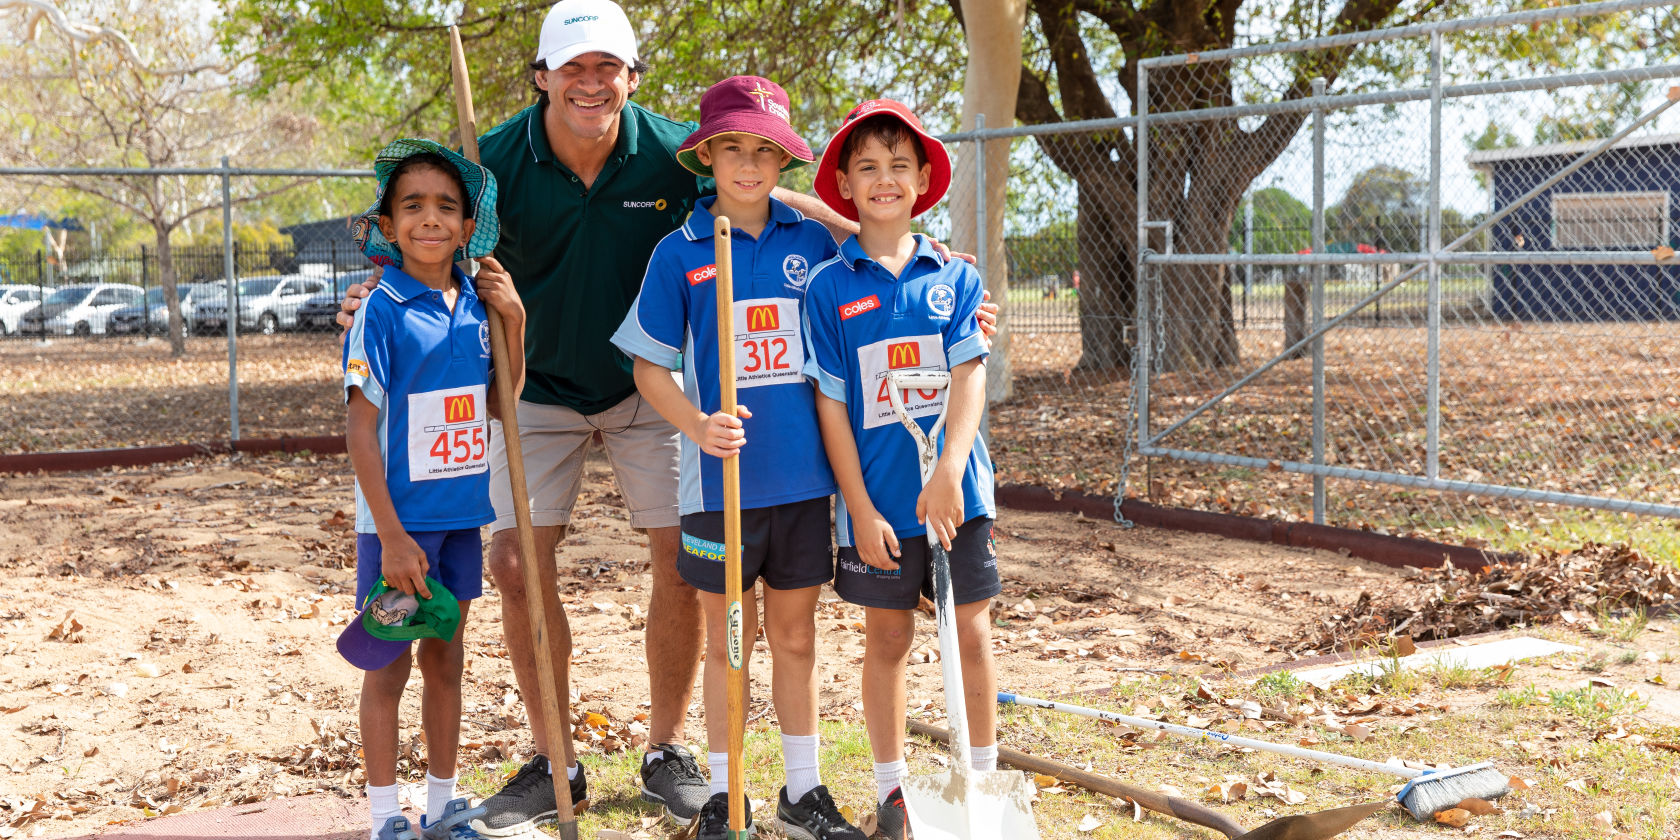 Johnathan Thurston teams up with young athletes to get storm ready